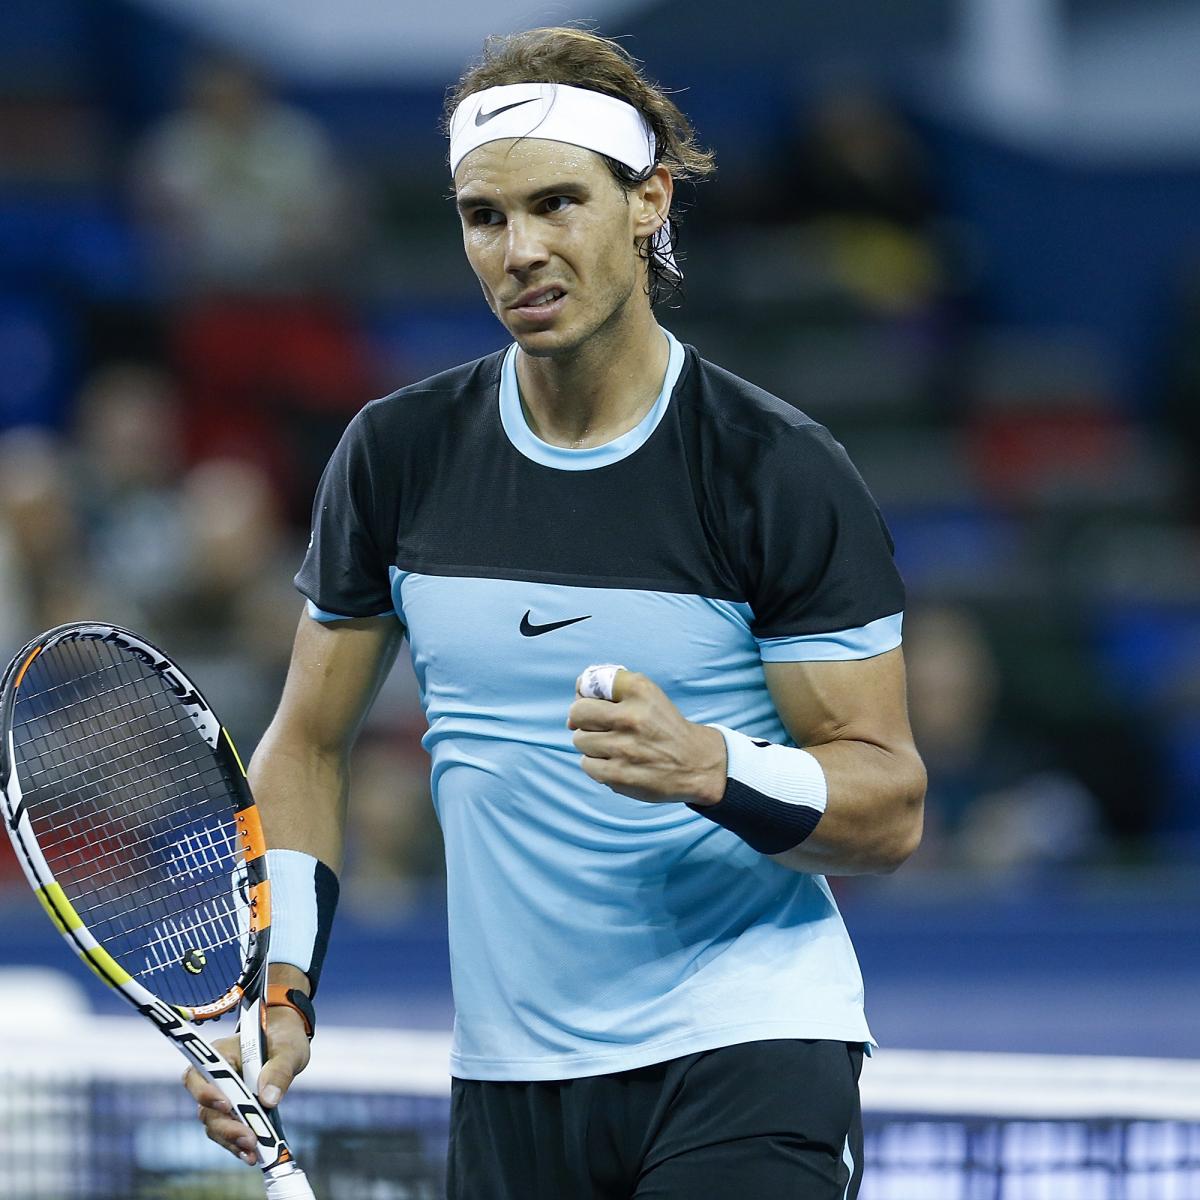 Shanghai Rolex Masters 2015: Friday Tennis Scores, Results and Updated ...